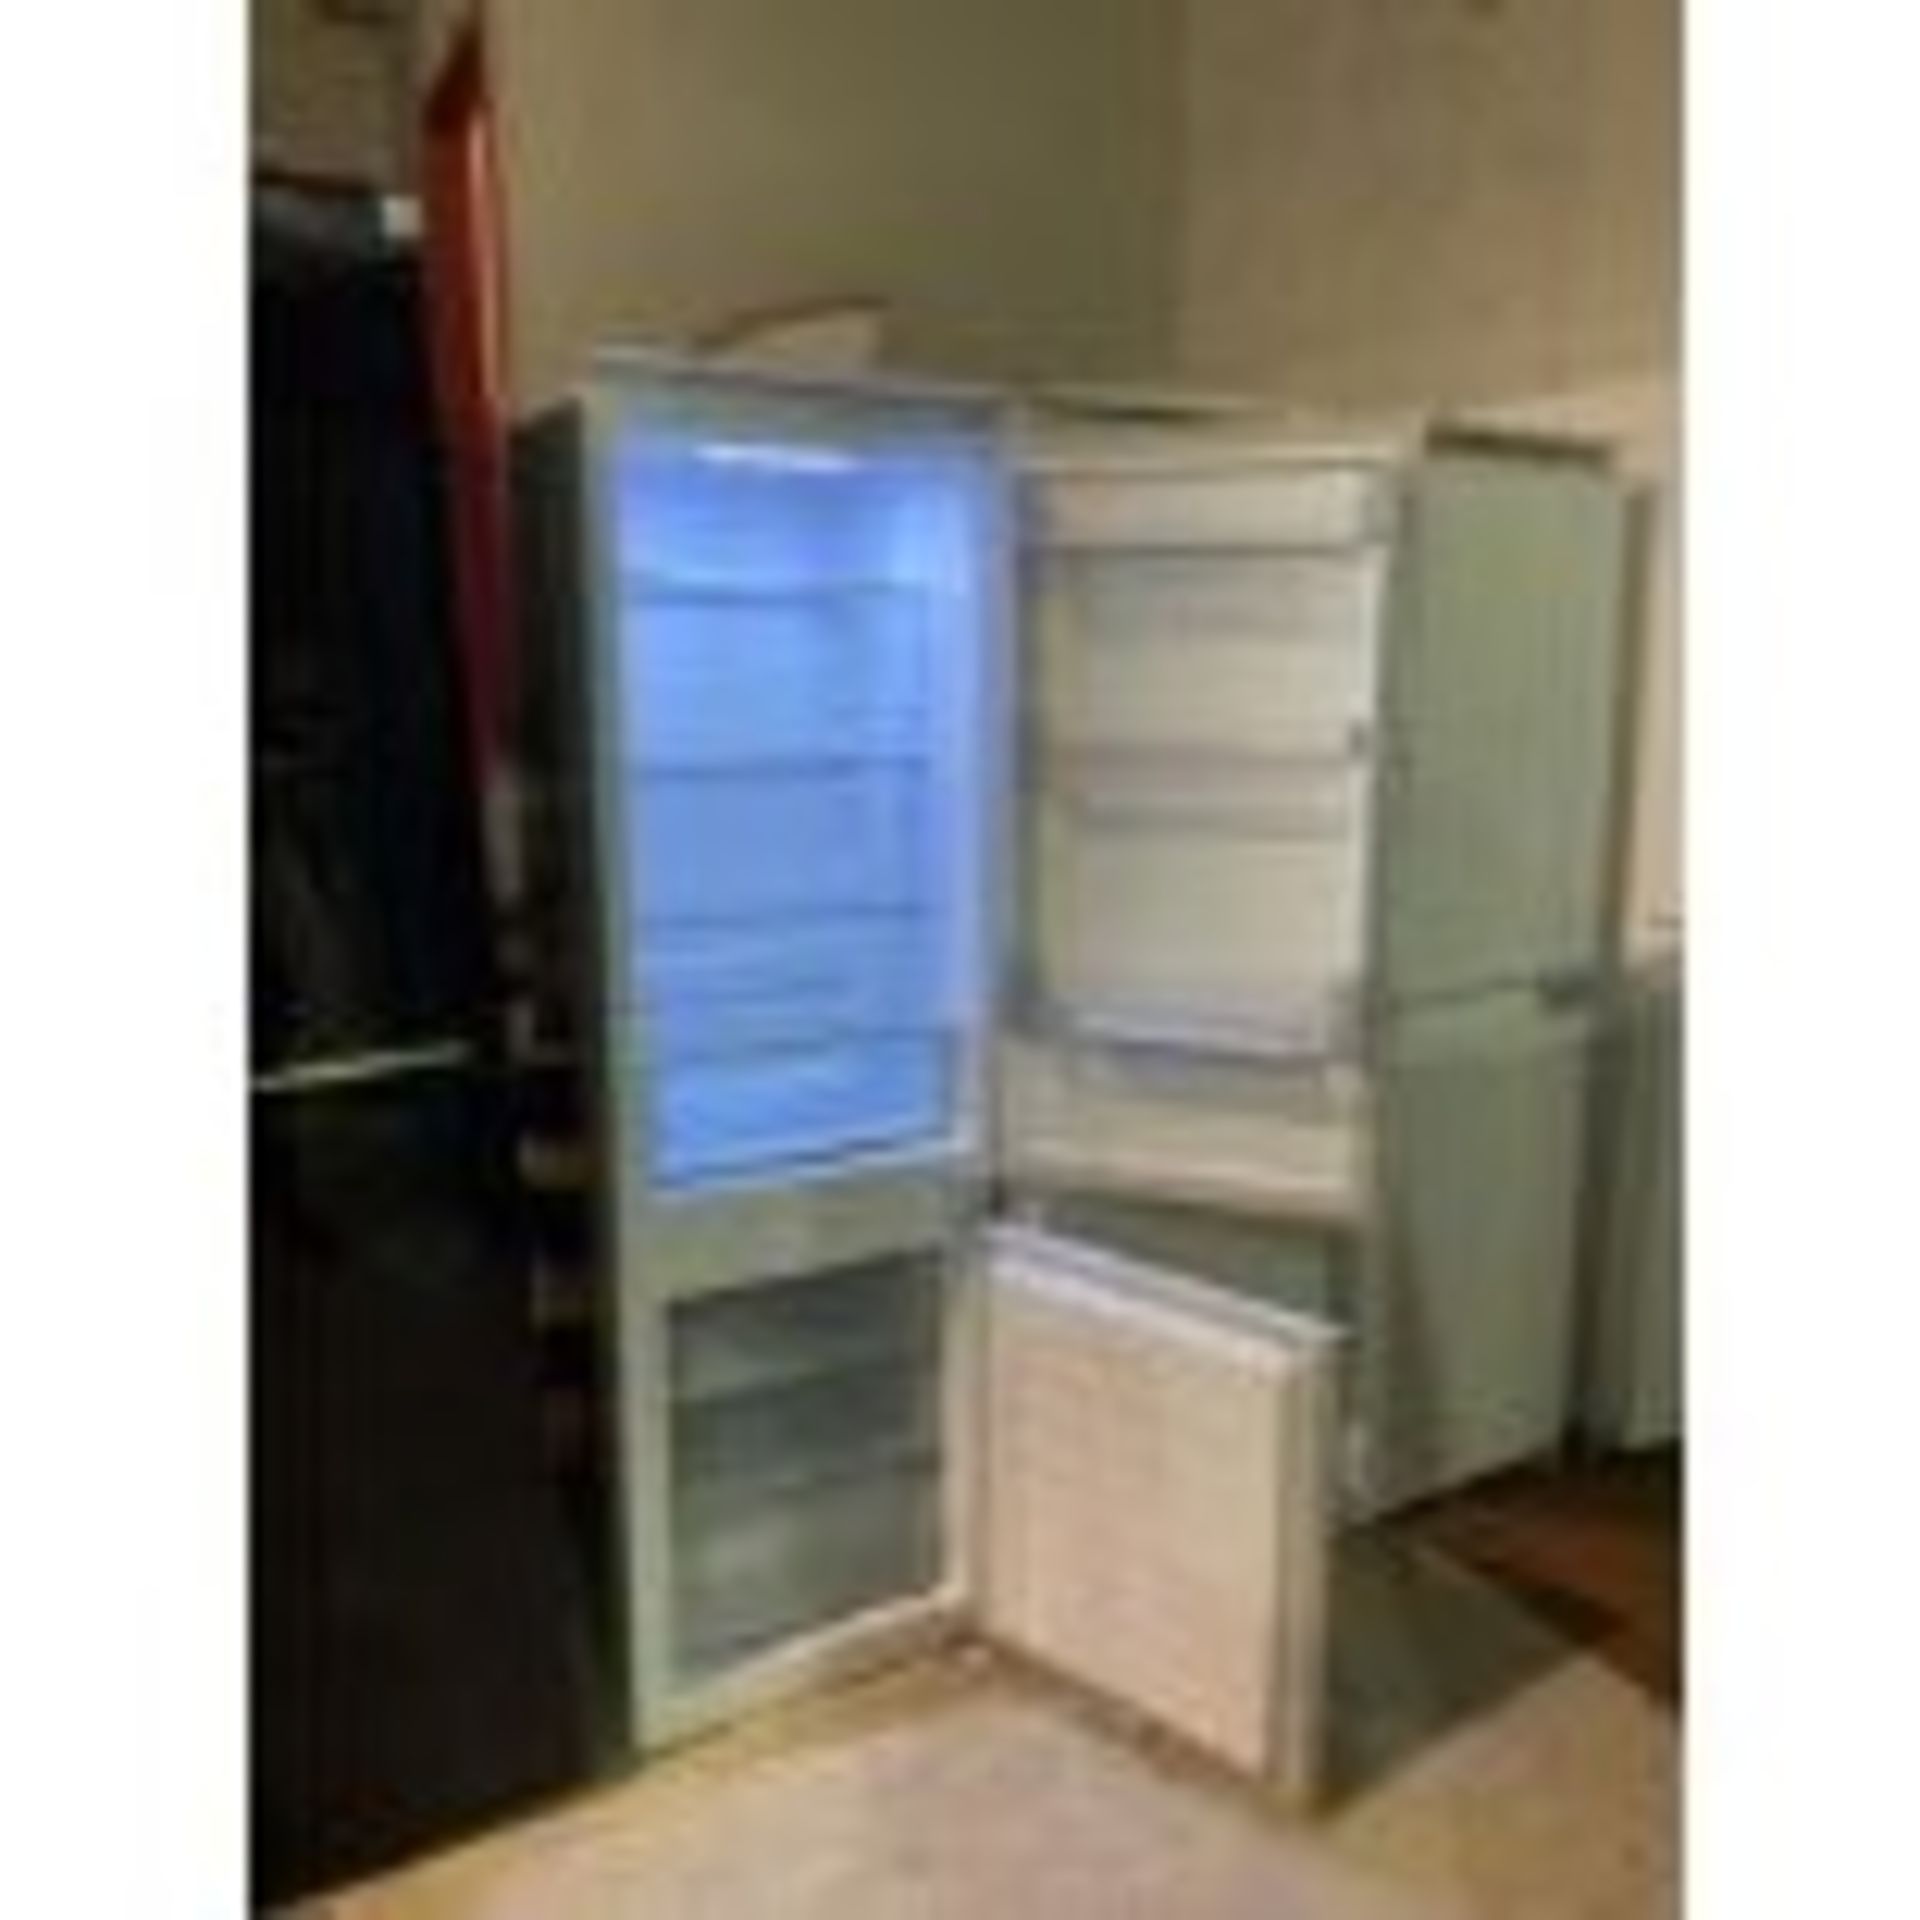 KENWOOD INTEGRATED FROST FREE FRIDGE FREEZER - KIFF7020 (OPENS TO THE RIGHT)